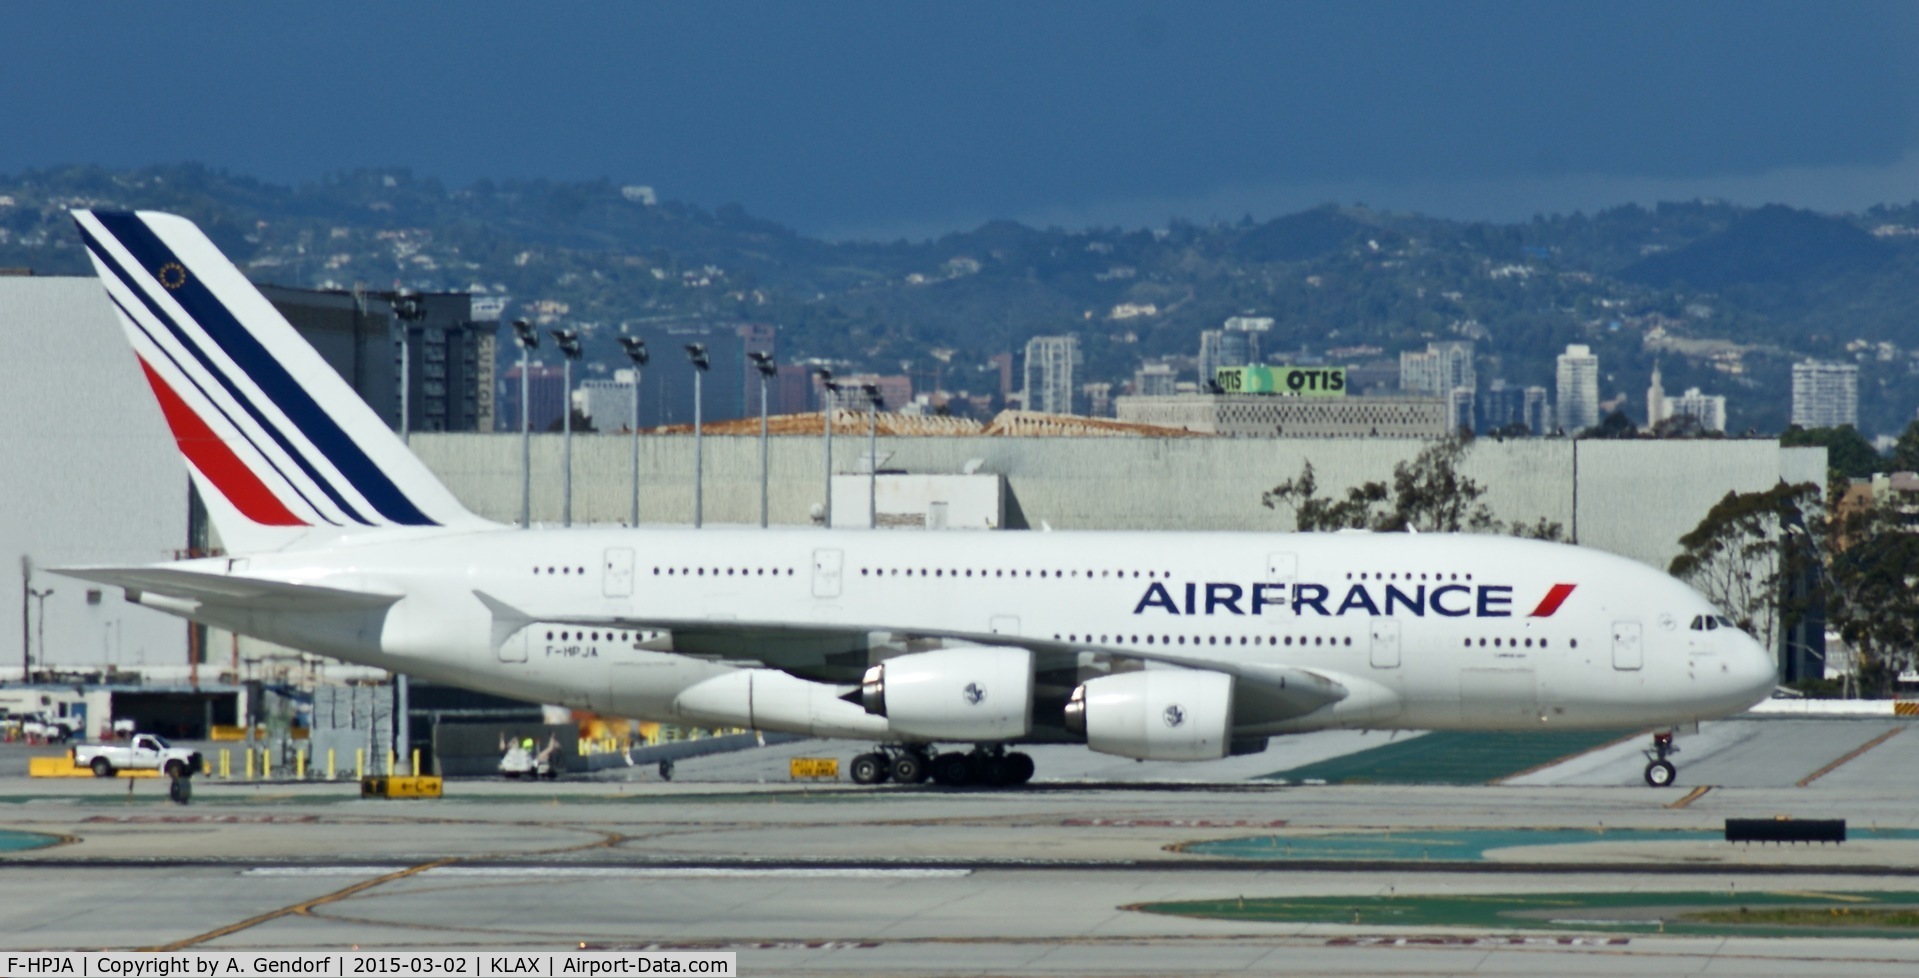 F-HPJA, 2010 Airbus A380-861 C/N 033, Air France is here taxiing at Los Angeles Int'l(KLAX)